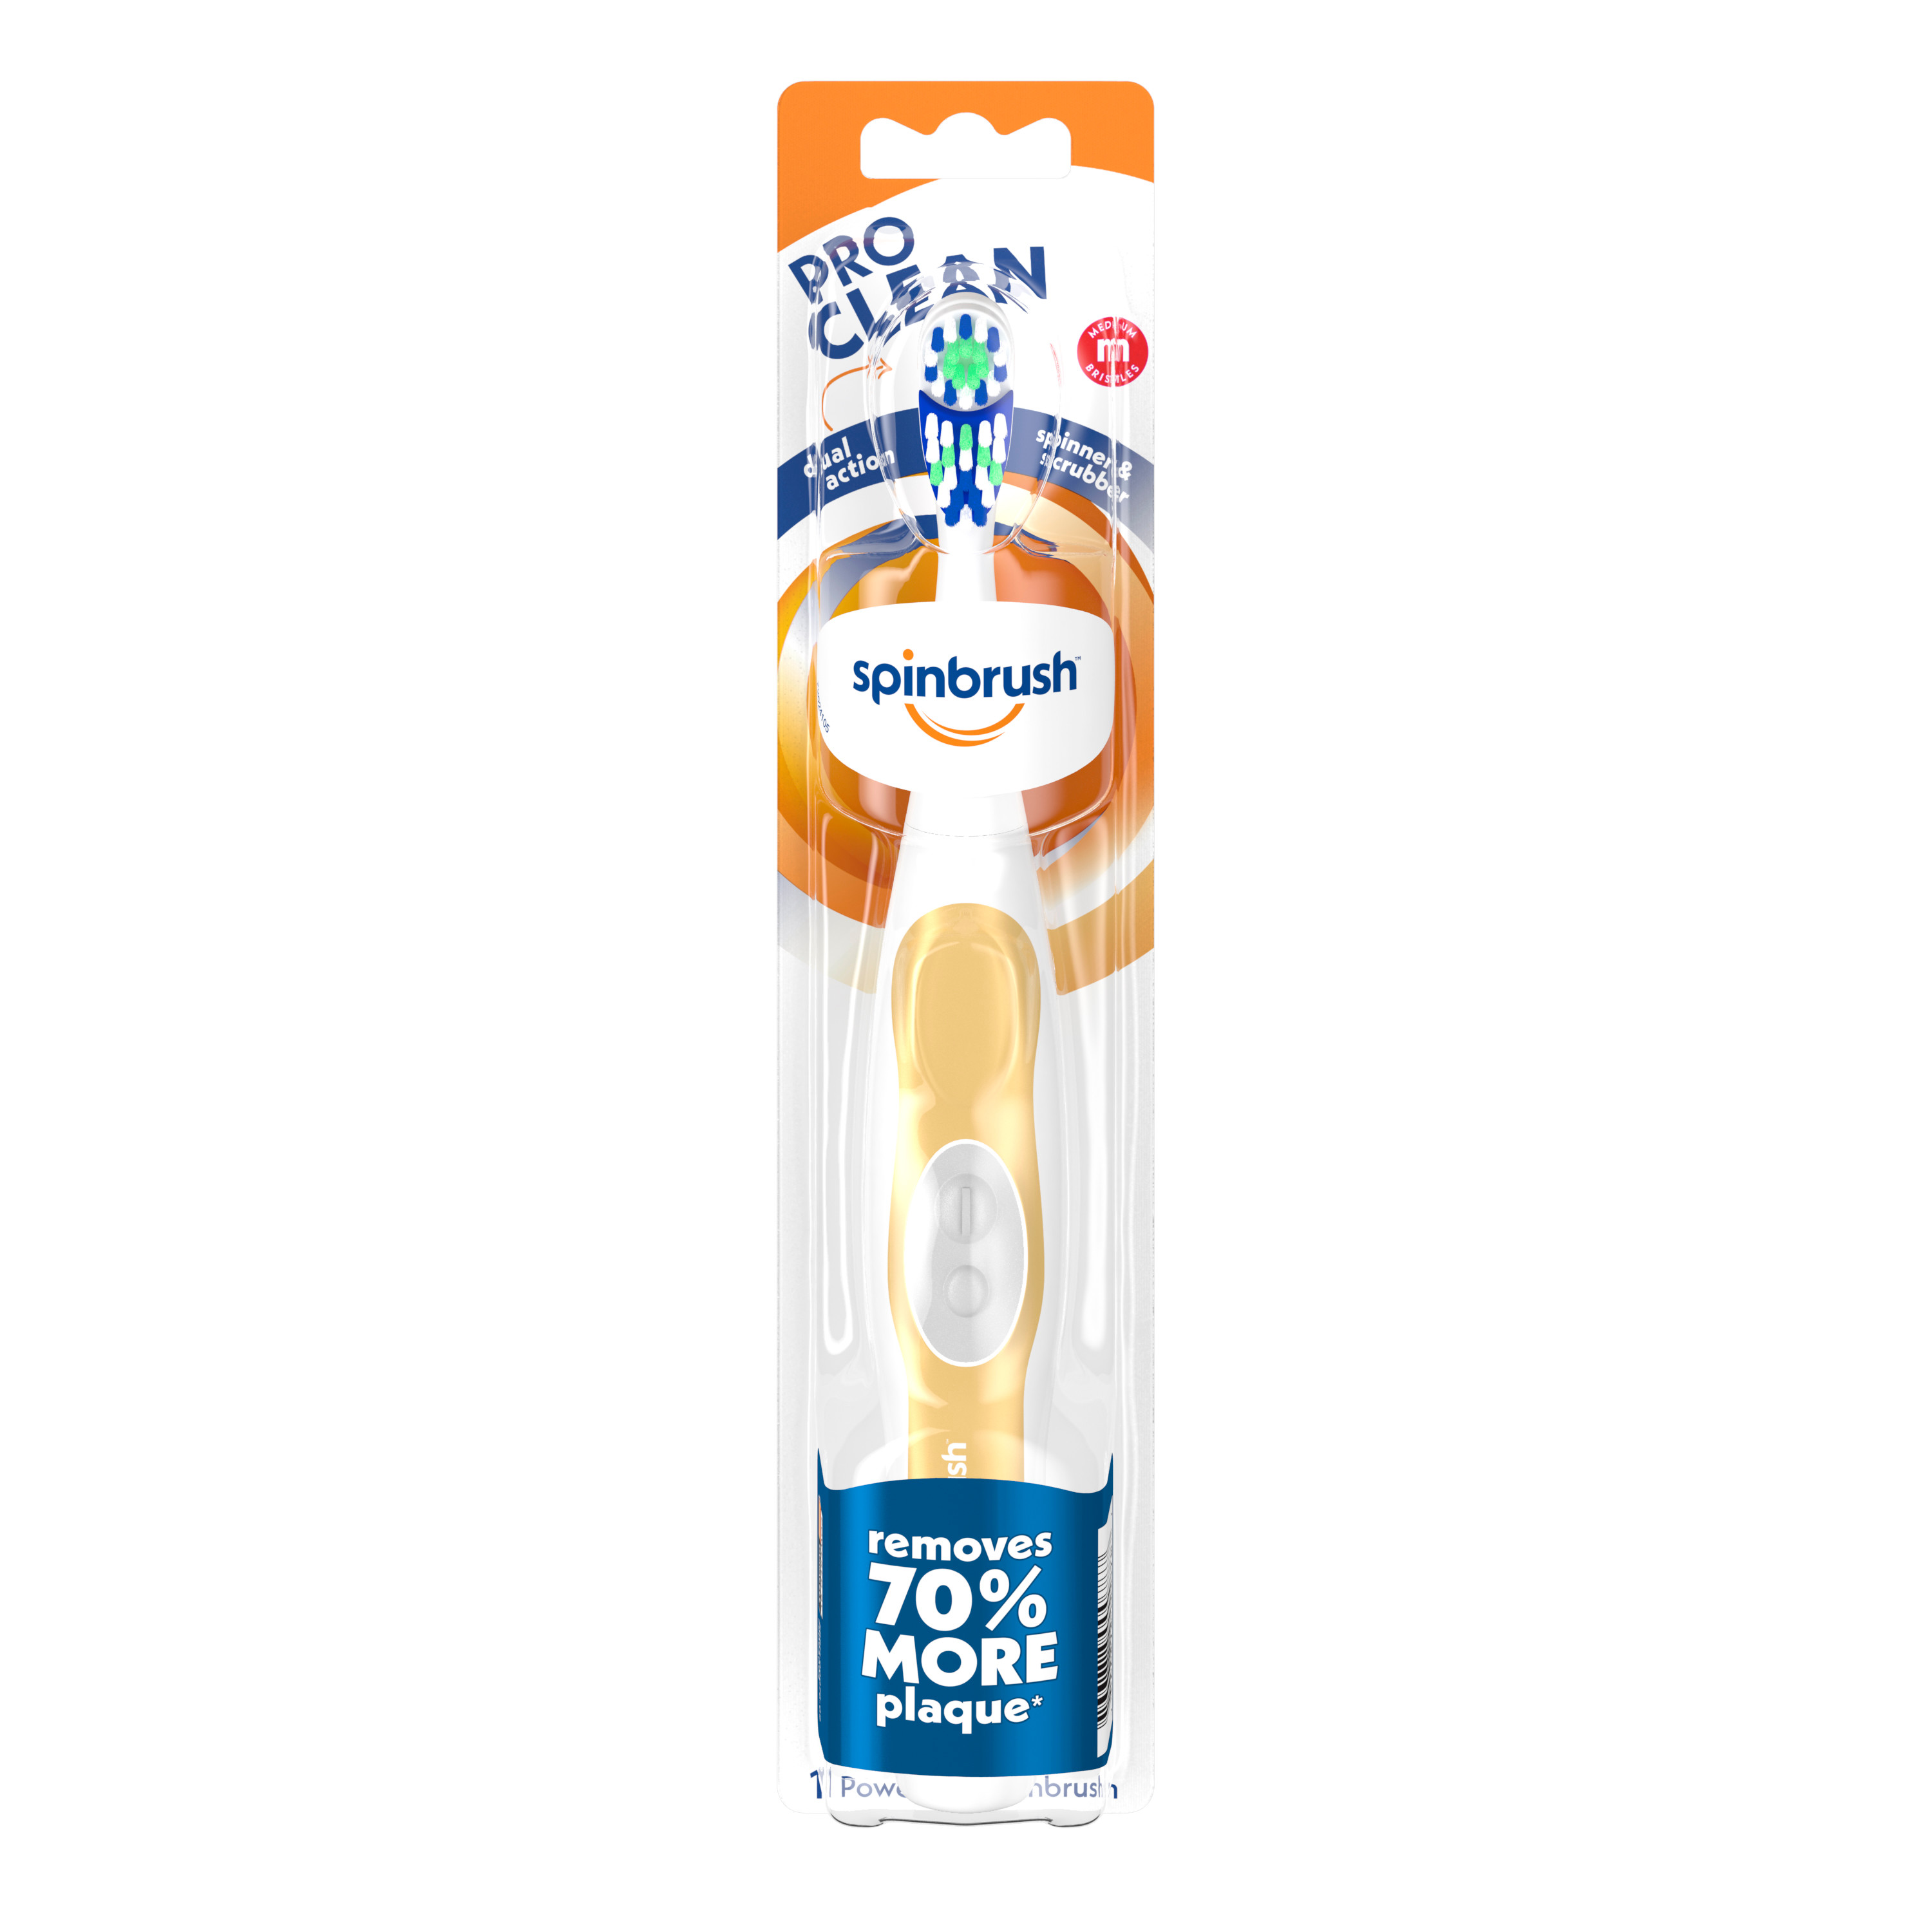 Spinbrush PRO CLEAN Battery Powered Electric Toothbrush for Adults, Medium Bristles, Color May Vary - image 1 of 8